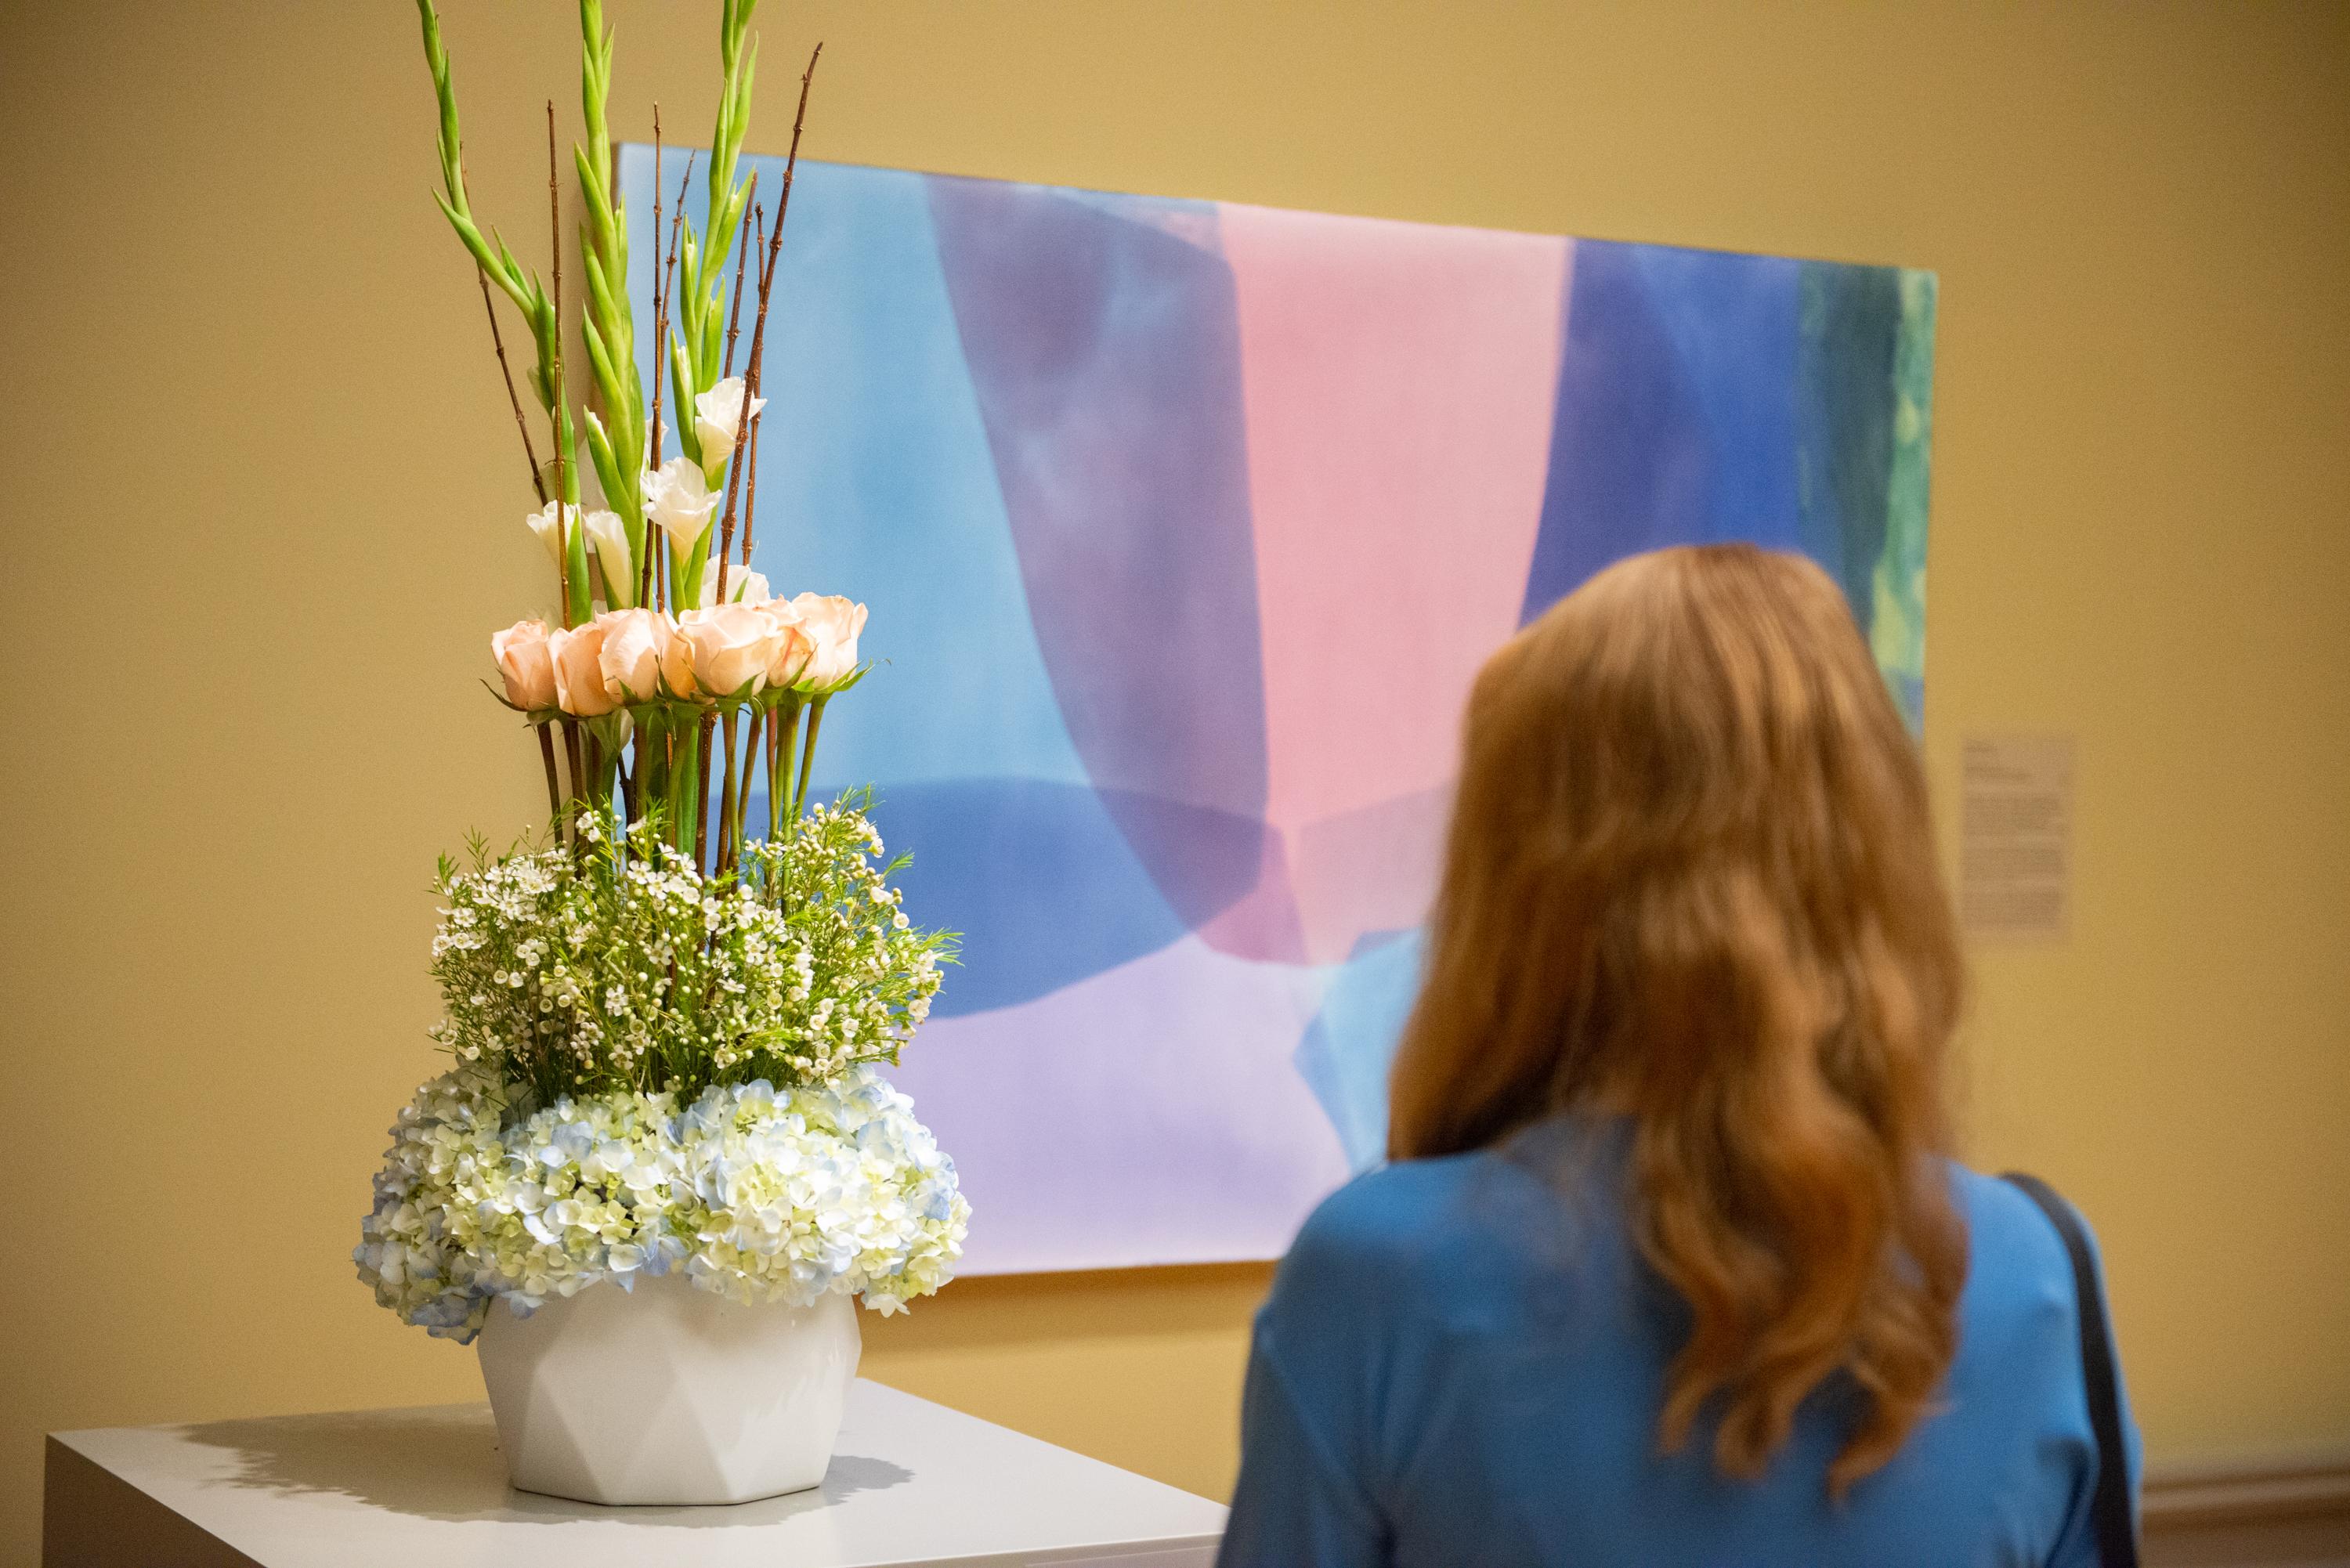 Woman in the CMA galleries with her back to camera facing a painting in pastel colors and a floral arrangement interpreting the painting.